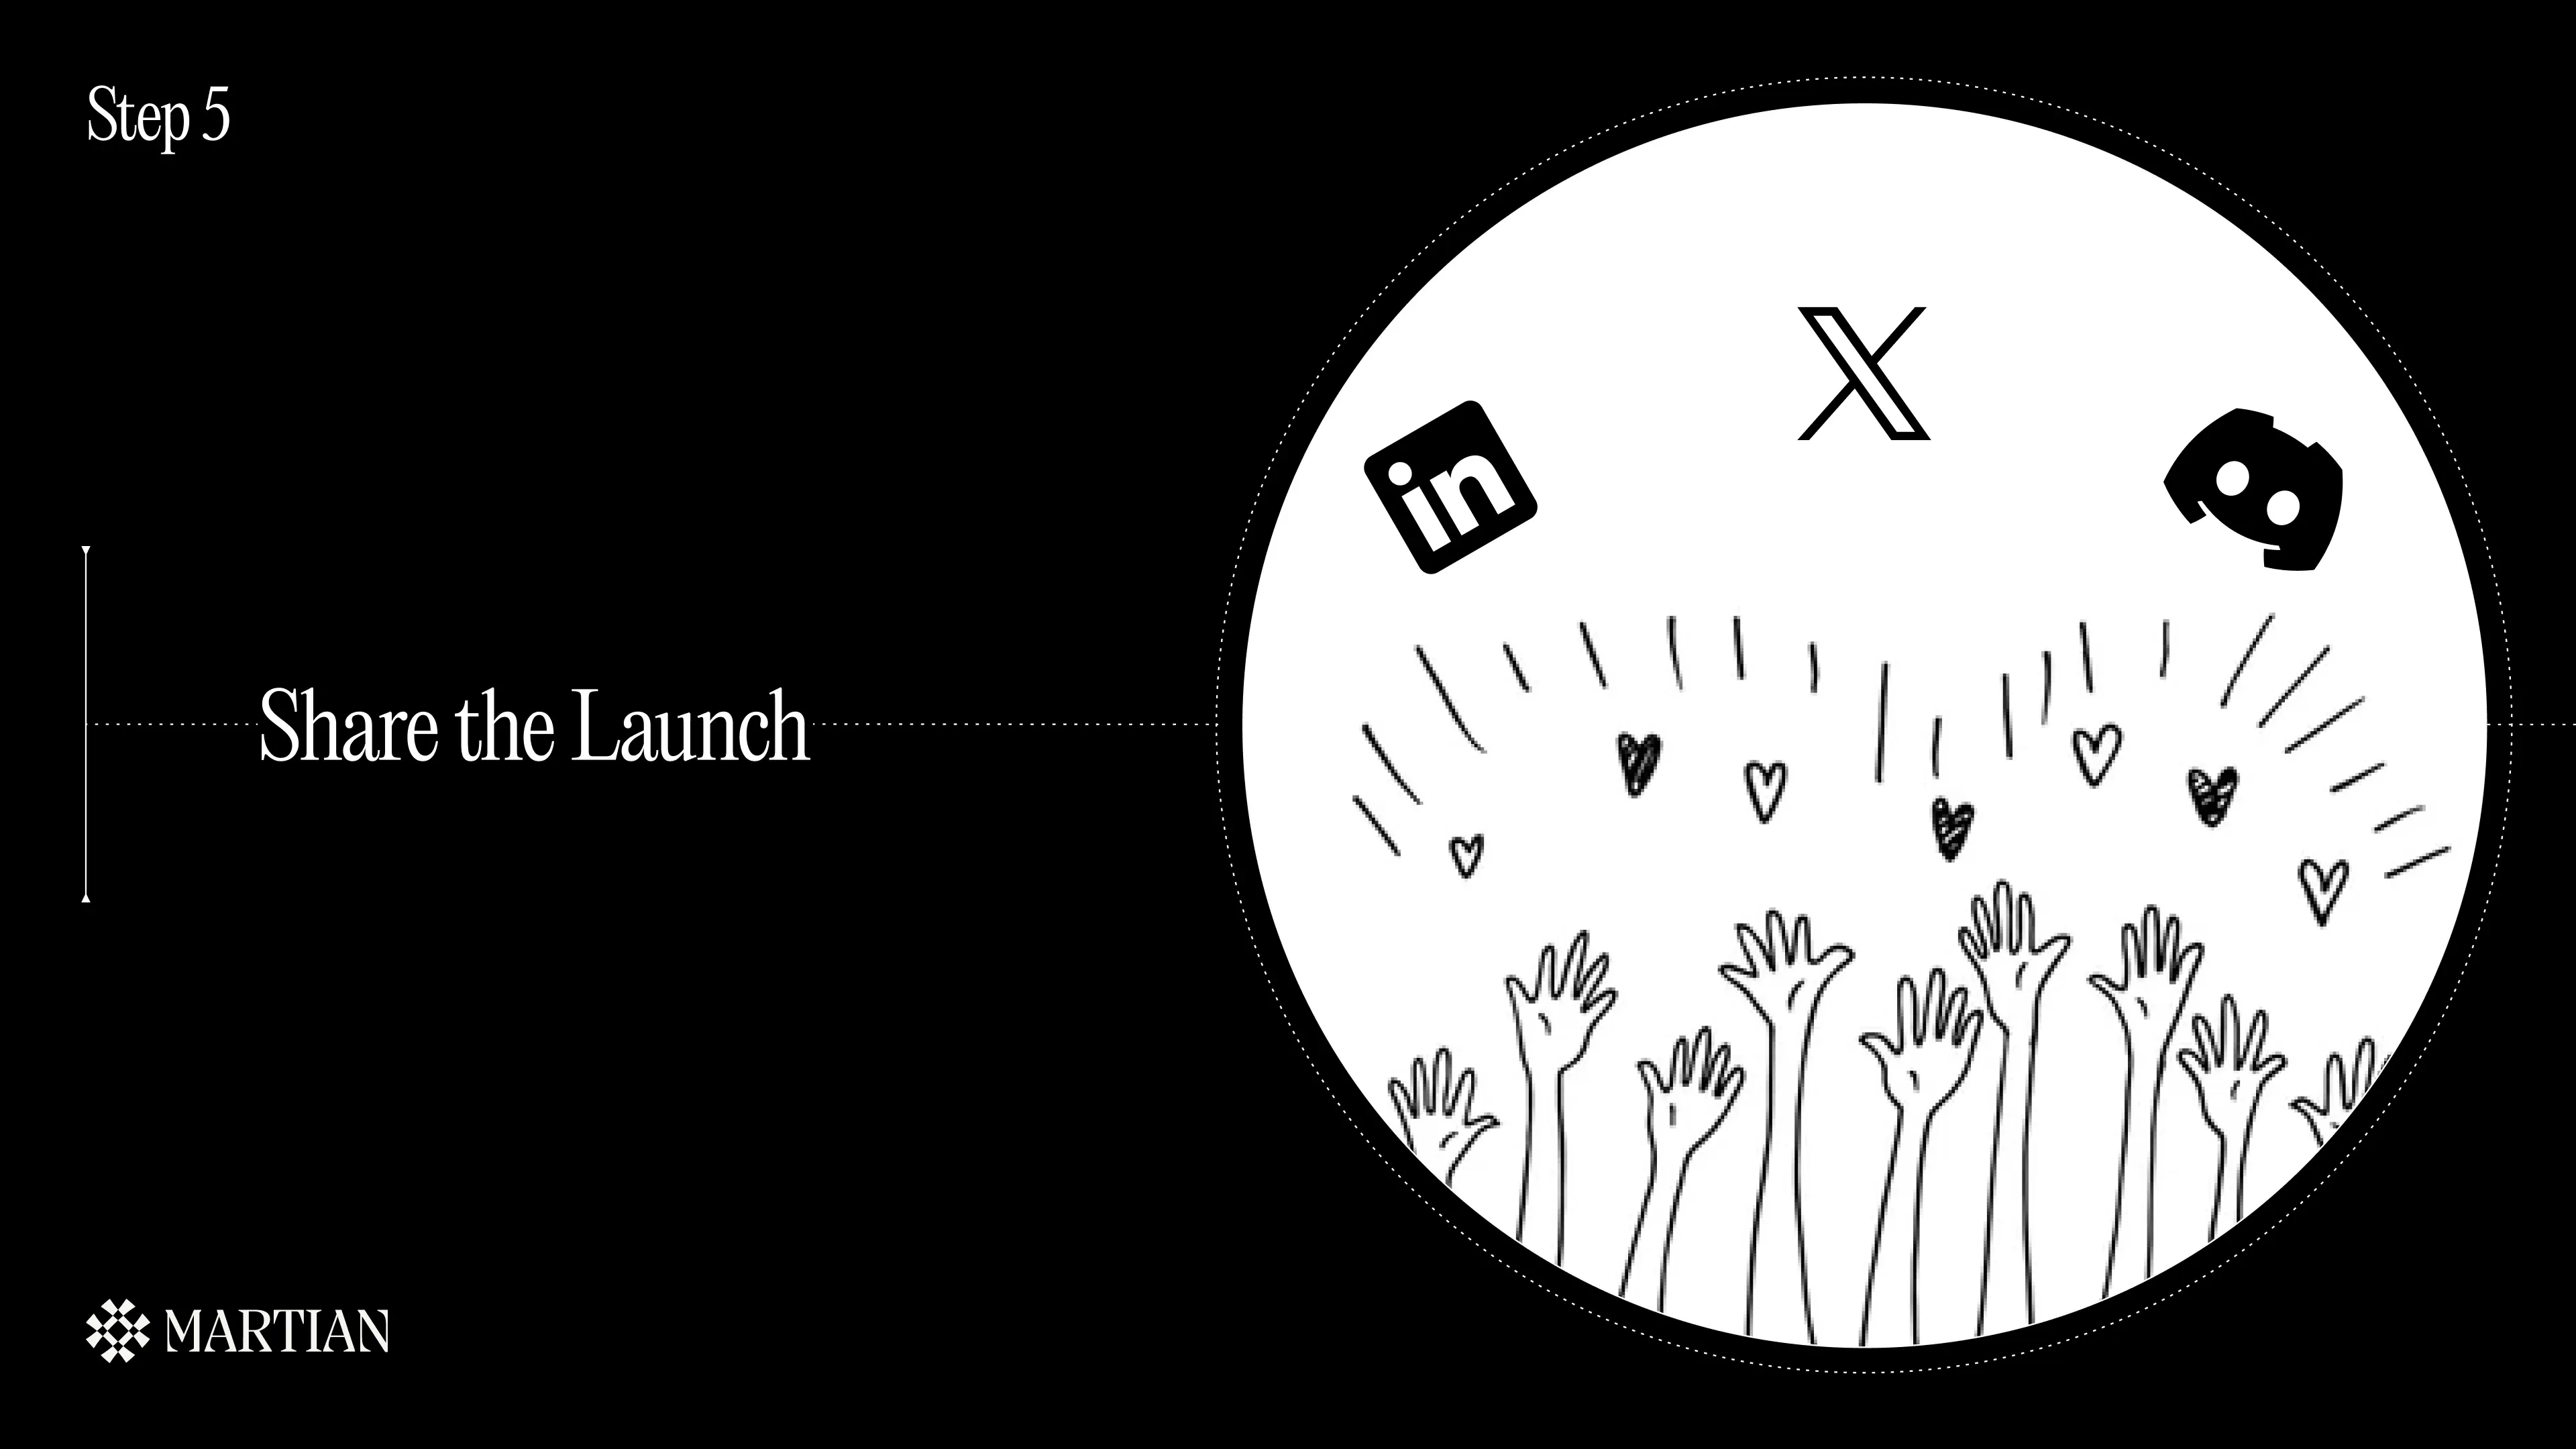 Share the Launch